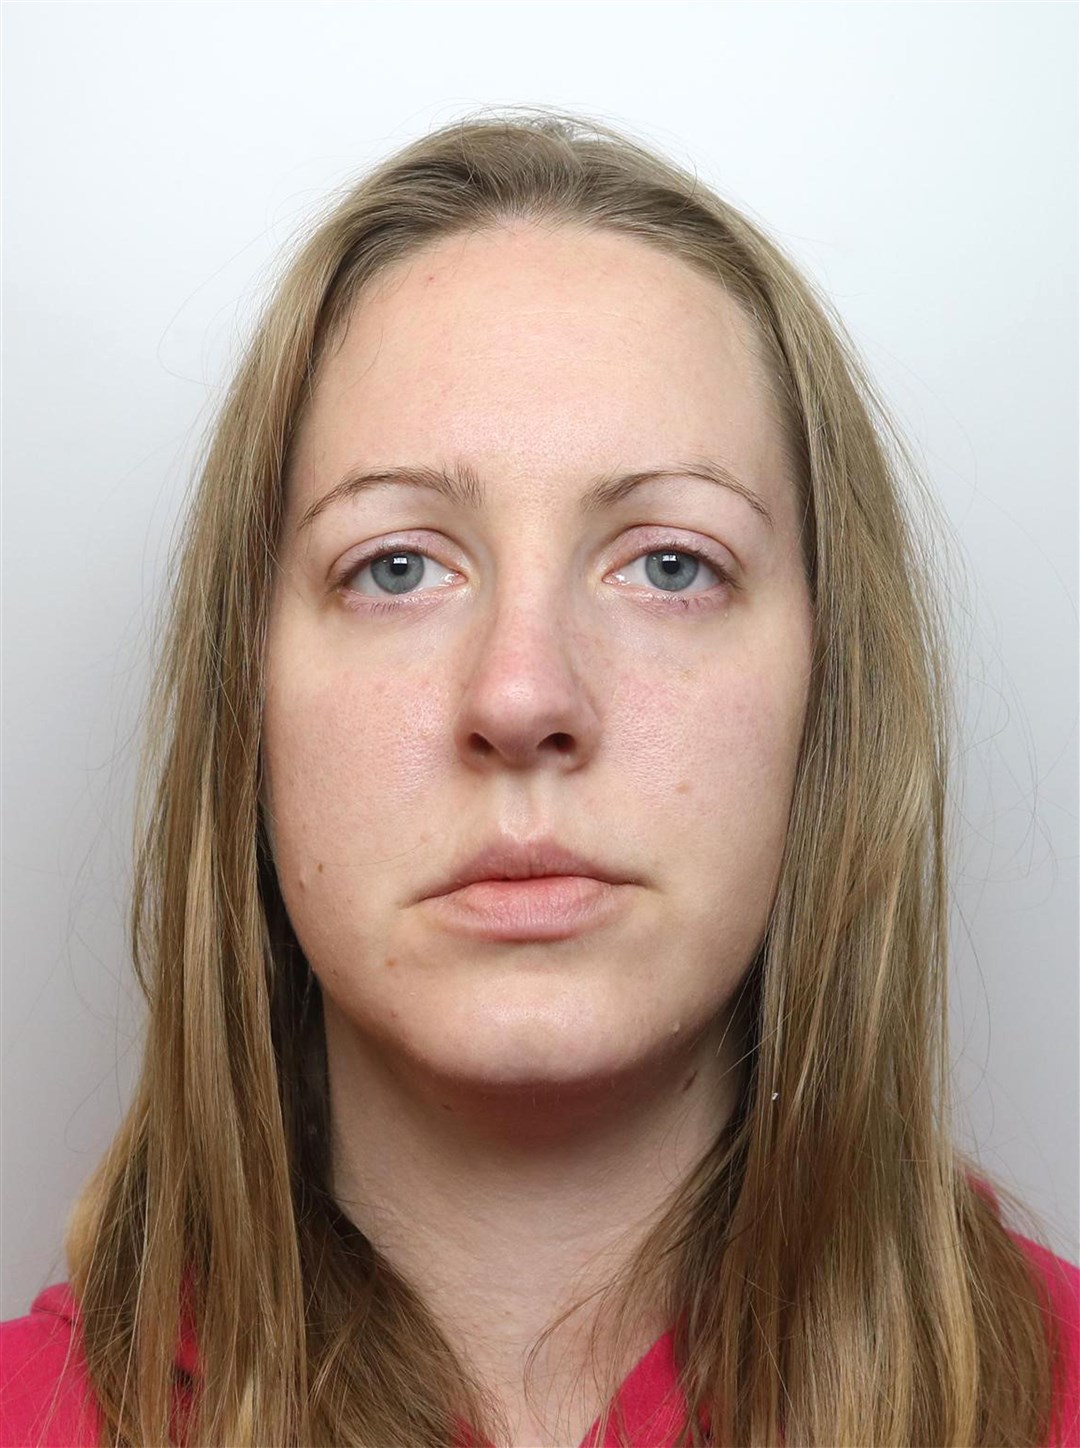 Lucy Letby, 33, was convicted of murdering seven babies and trying to kill six more while working in the Countess of Chester Hospital’s neonatal unit between 2015 and 2016 (Cheshire Constabulary/PA)